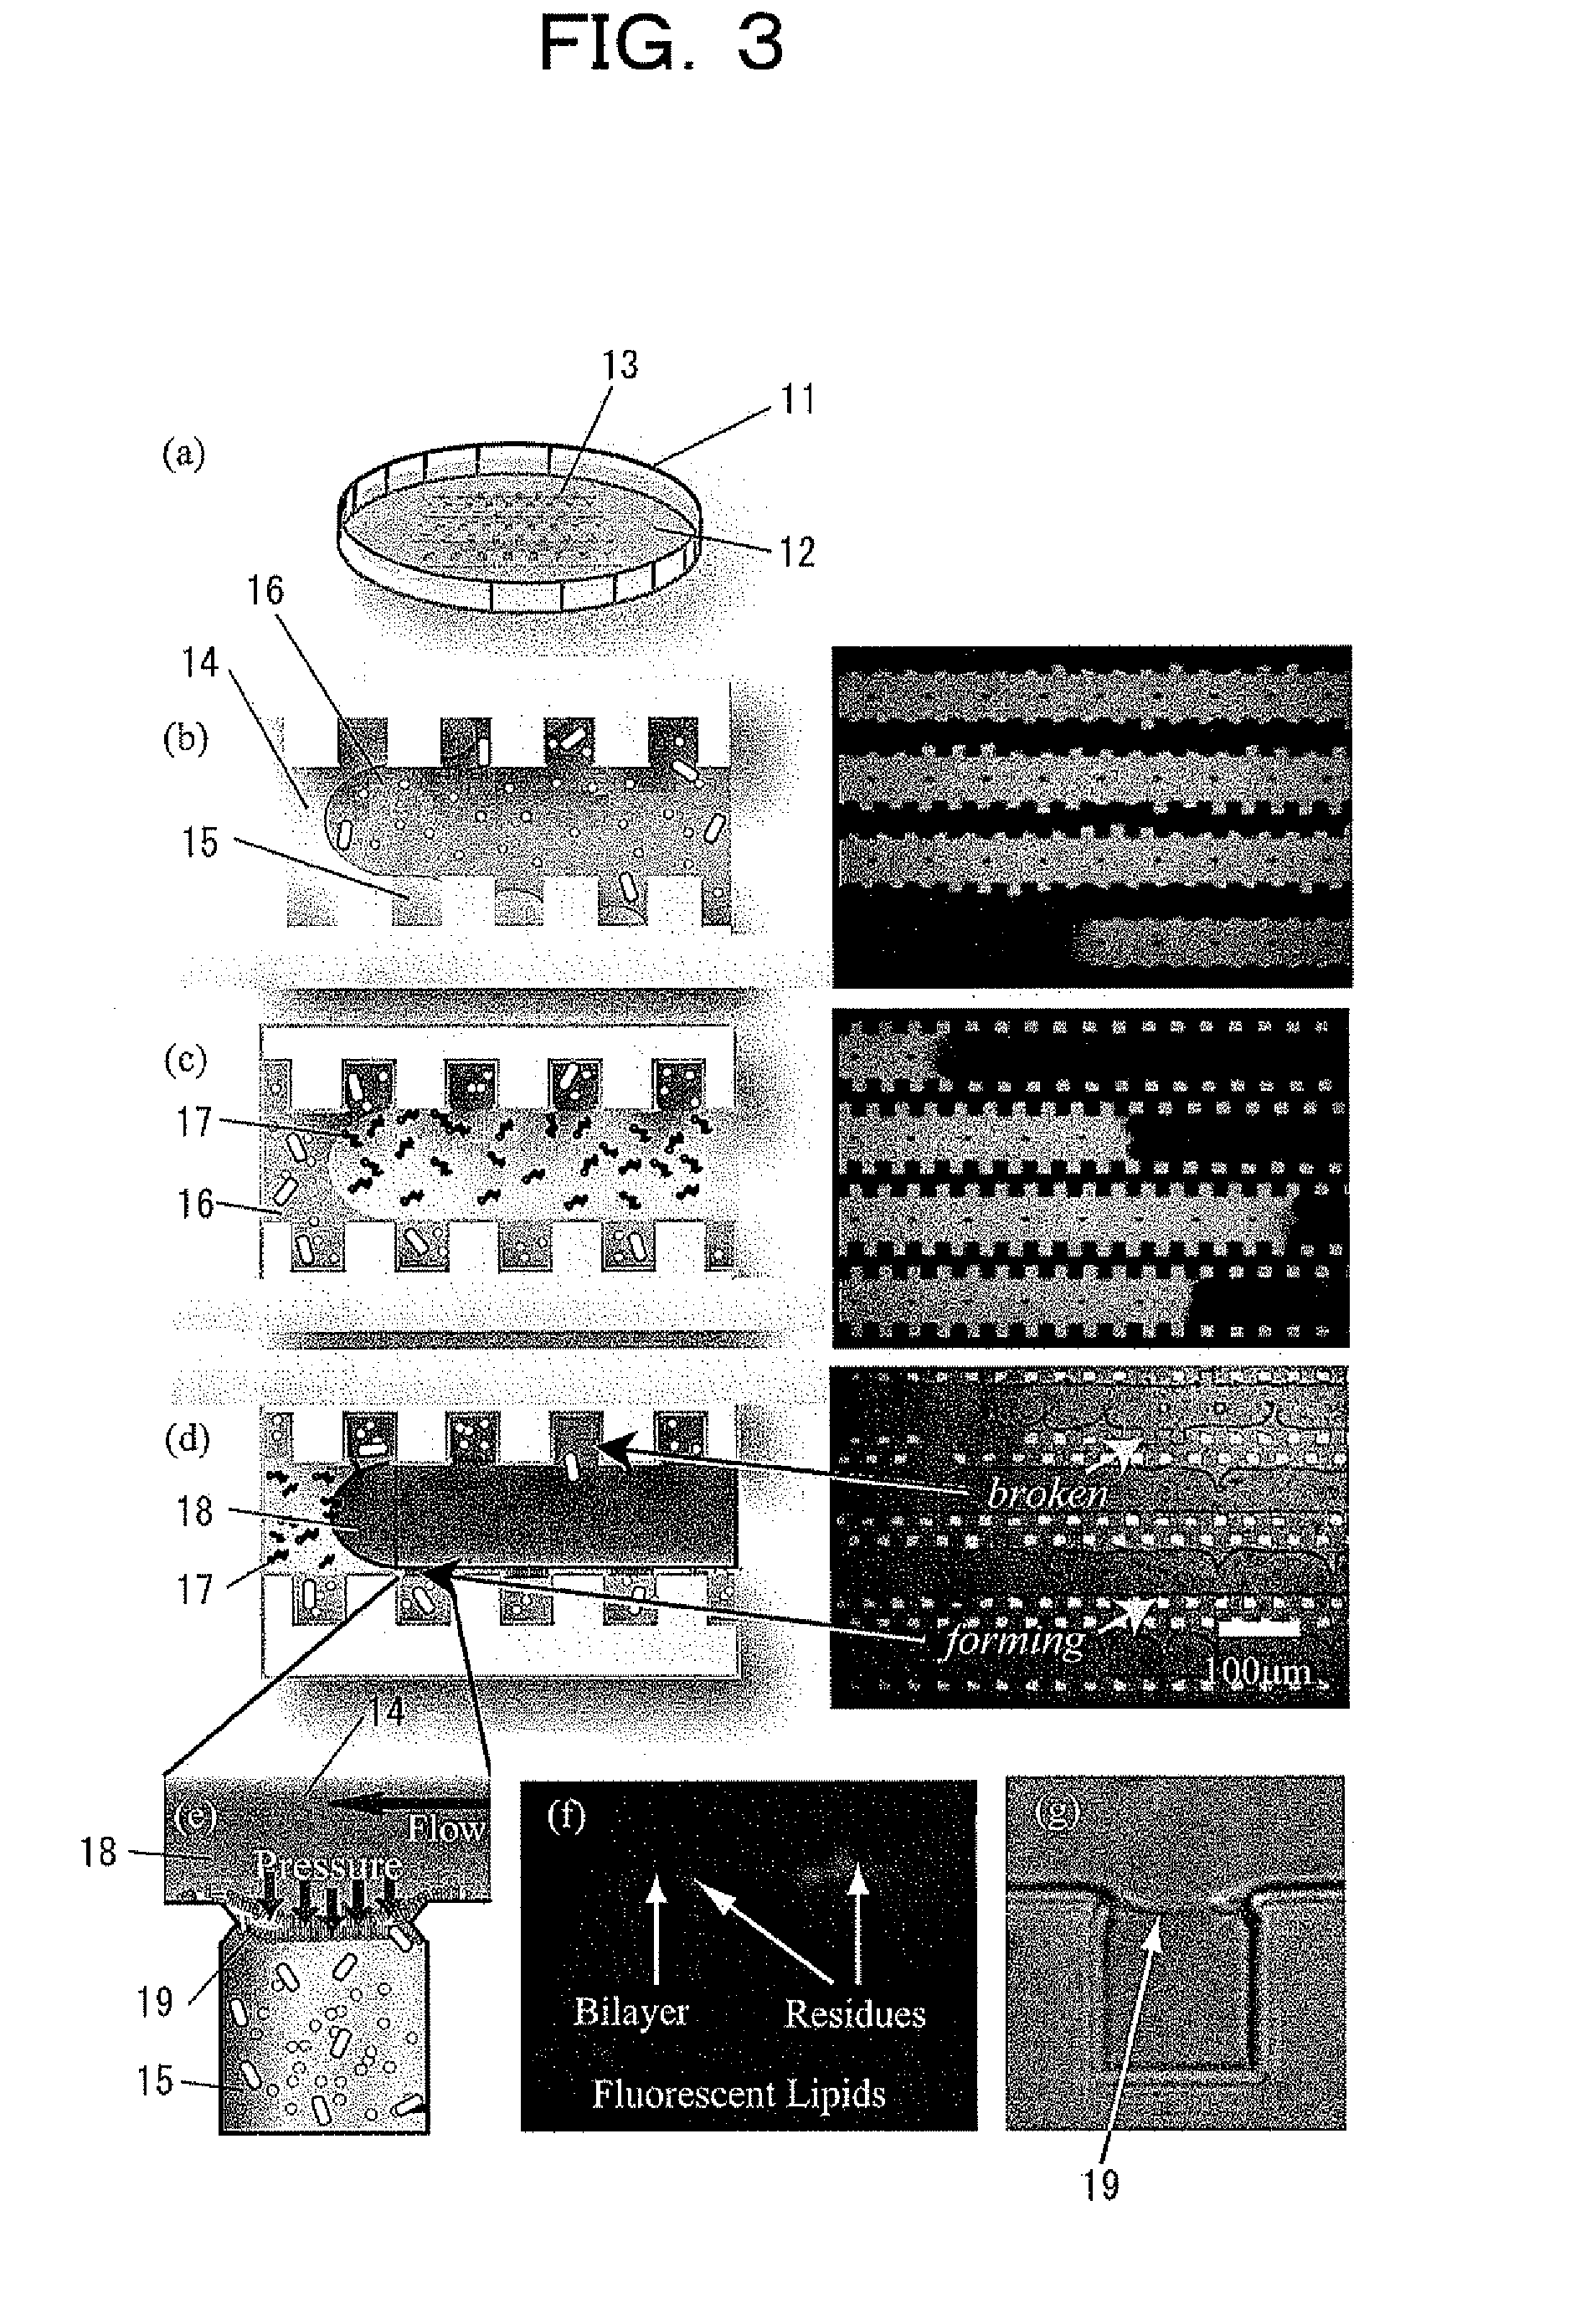 Planar lipid bilayer array formed by microfluidic technique and method of analysis using planar lipid bilayer